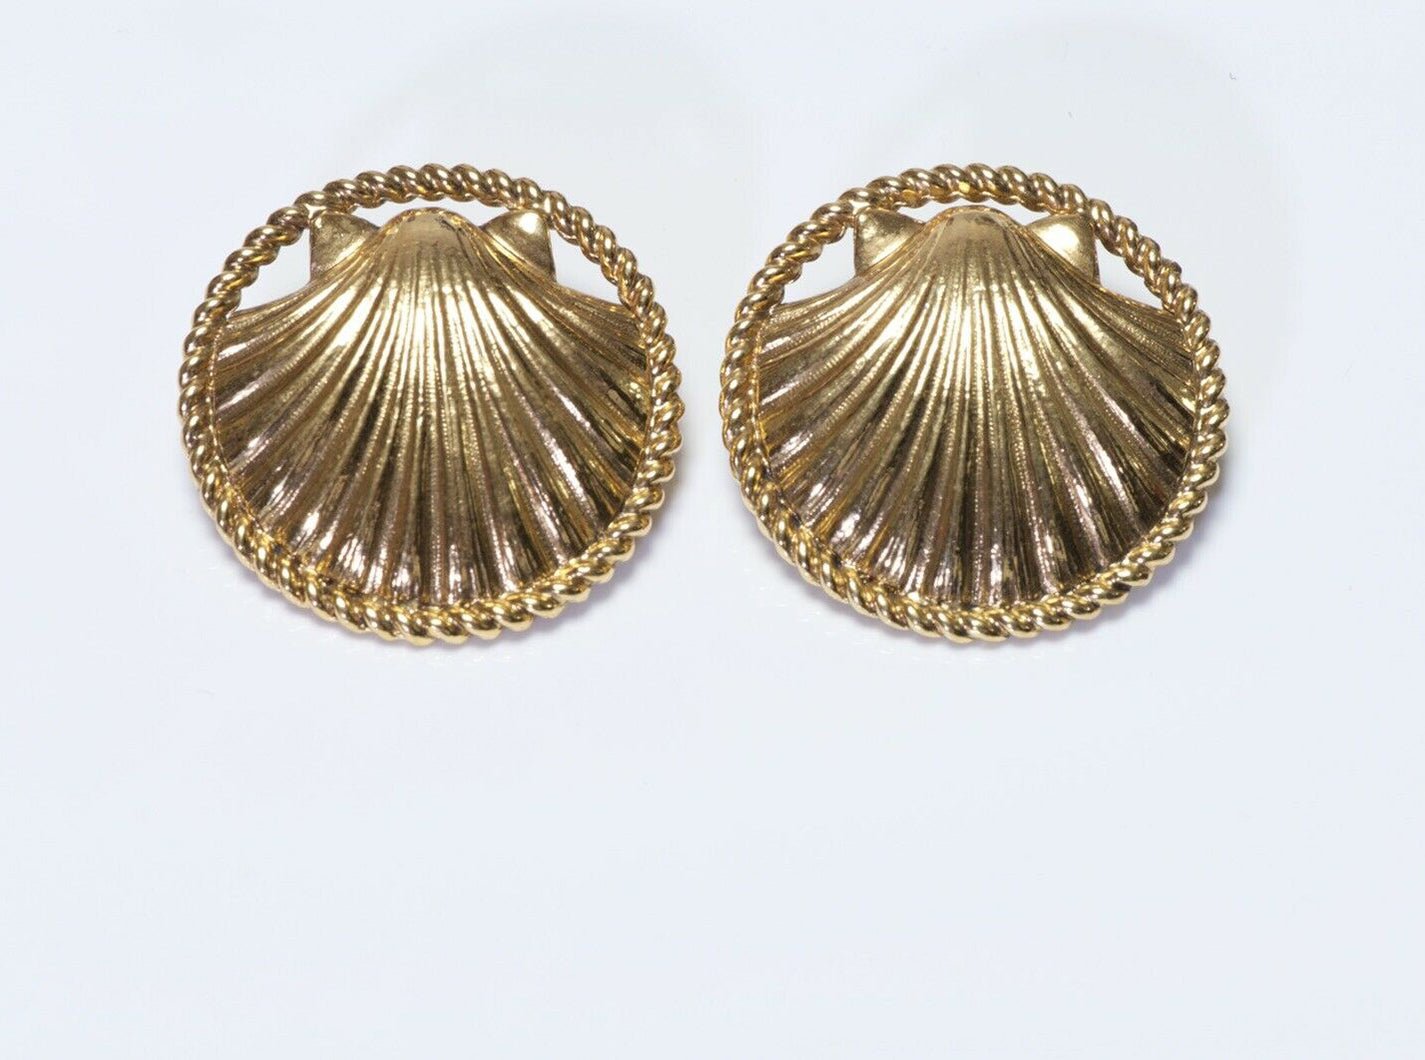 CHANEL Paris 1980’s Gold Plated Large Seashell Earrings